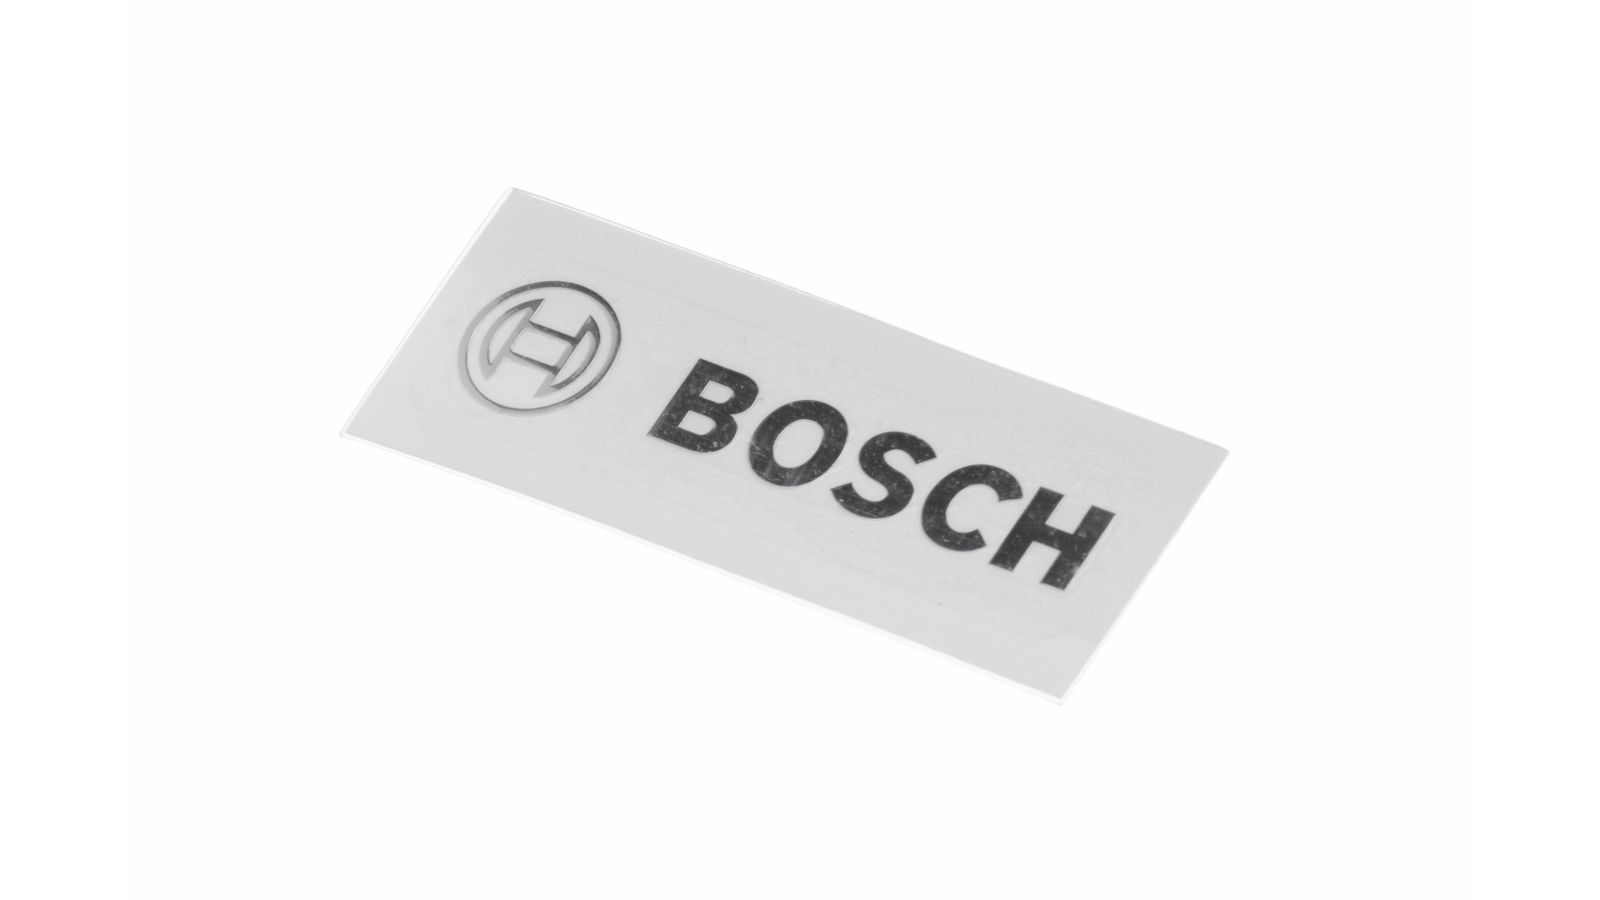 Already Paradox Excrement Logo, Plate With Bosch Logo For Fridges, Freezers and Dishwashers -  00614976 BSH - Bosch / Siemens